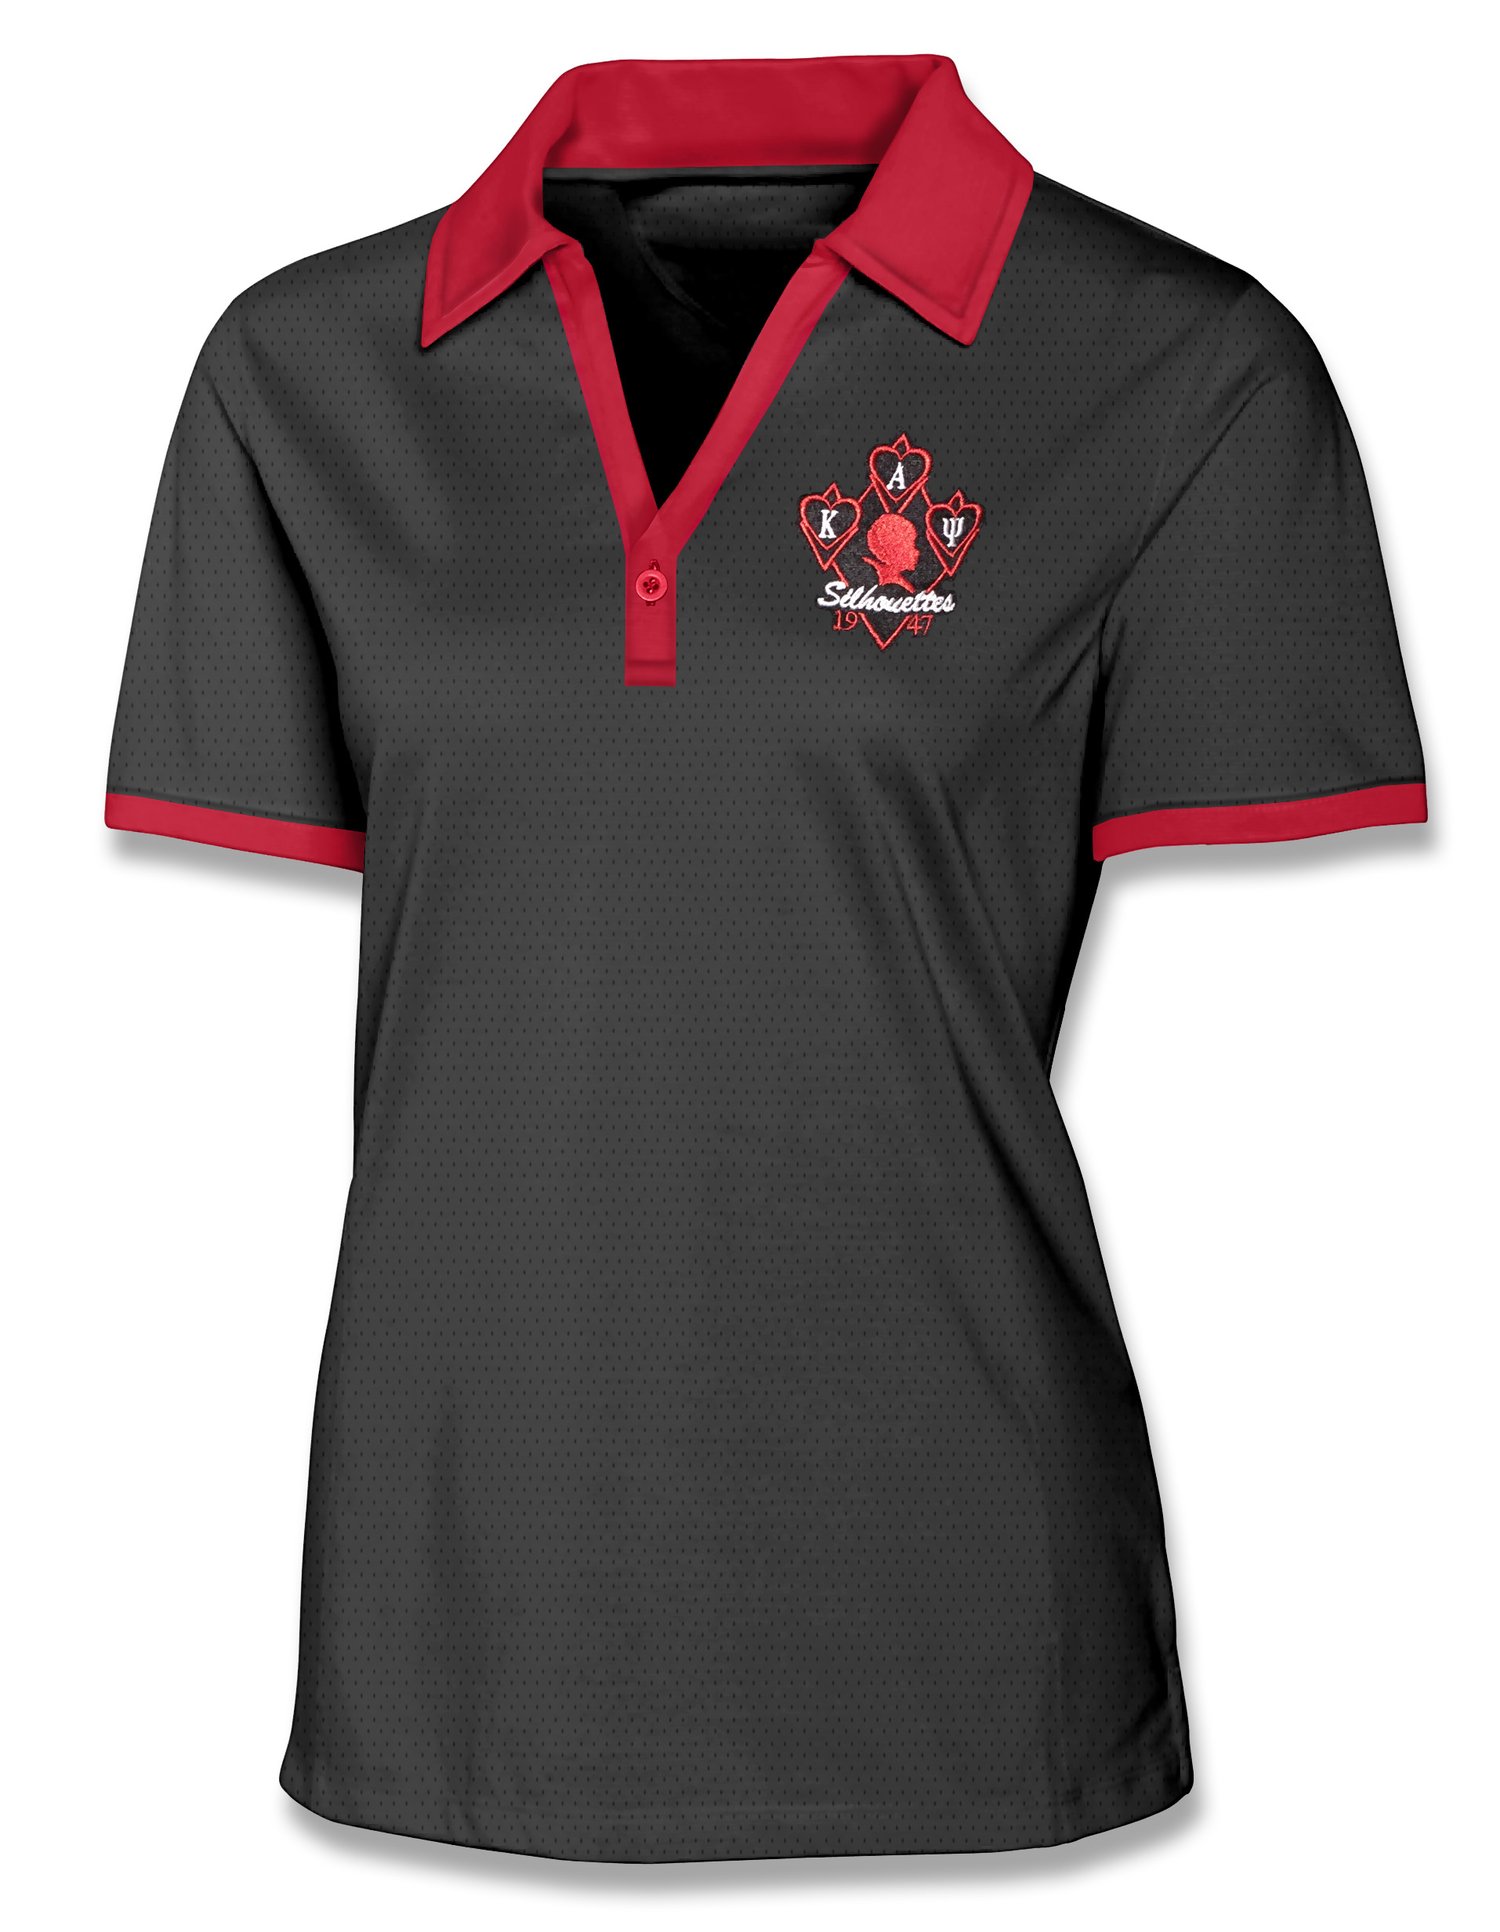 Image of Silhouette Moisture Wicking One Button Golf Polo (Black w/Red Accents)